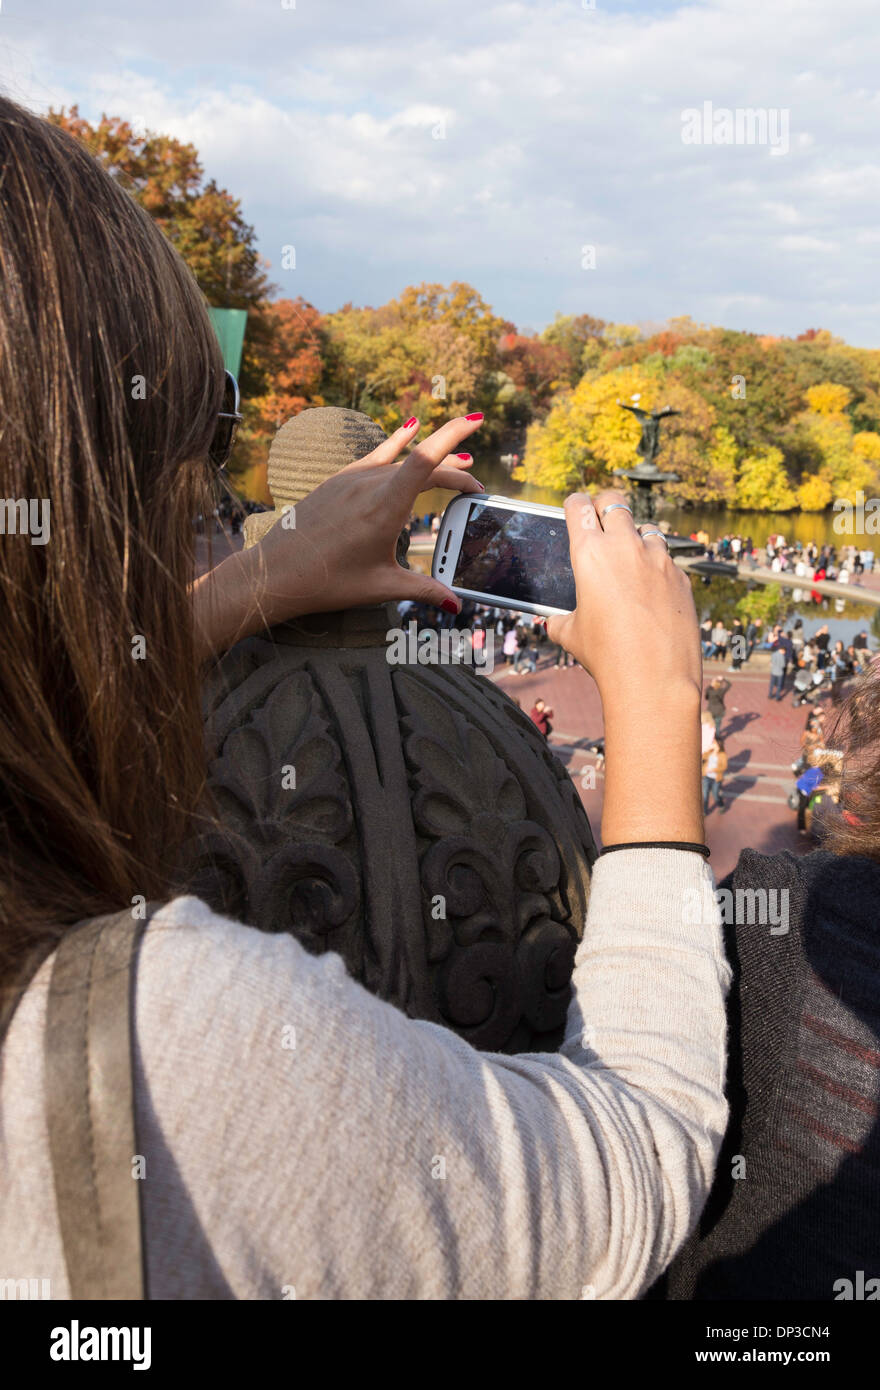 Female Tourist Photographing Activity in Central Park, NYC, USA Stock Photo